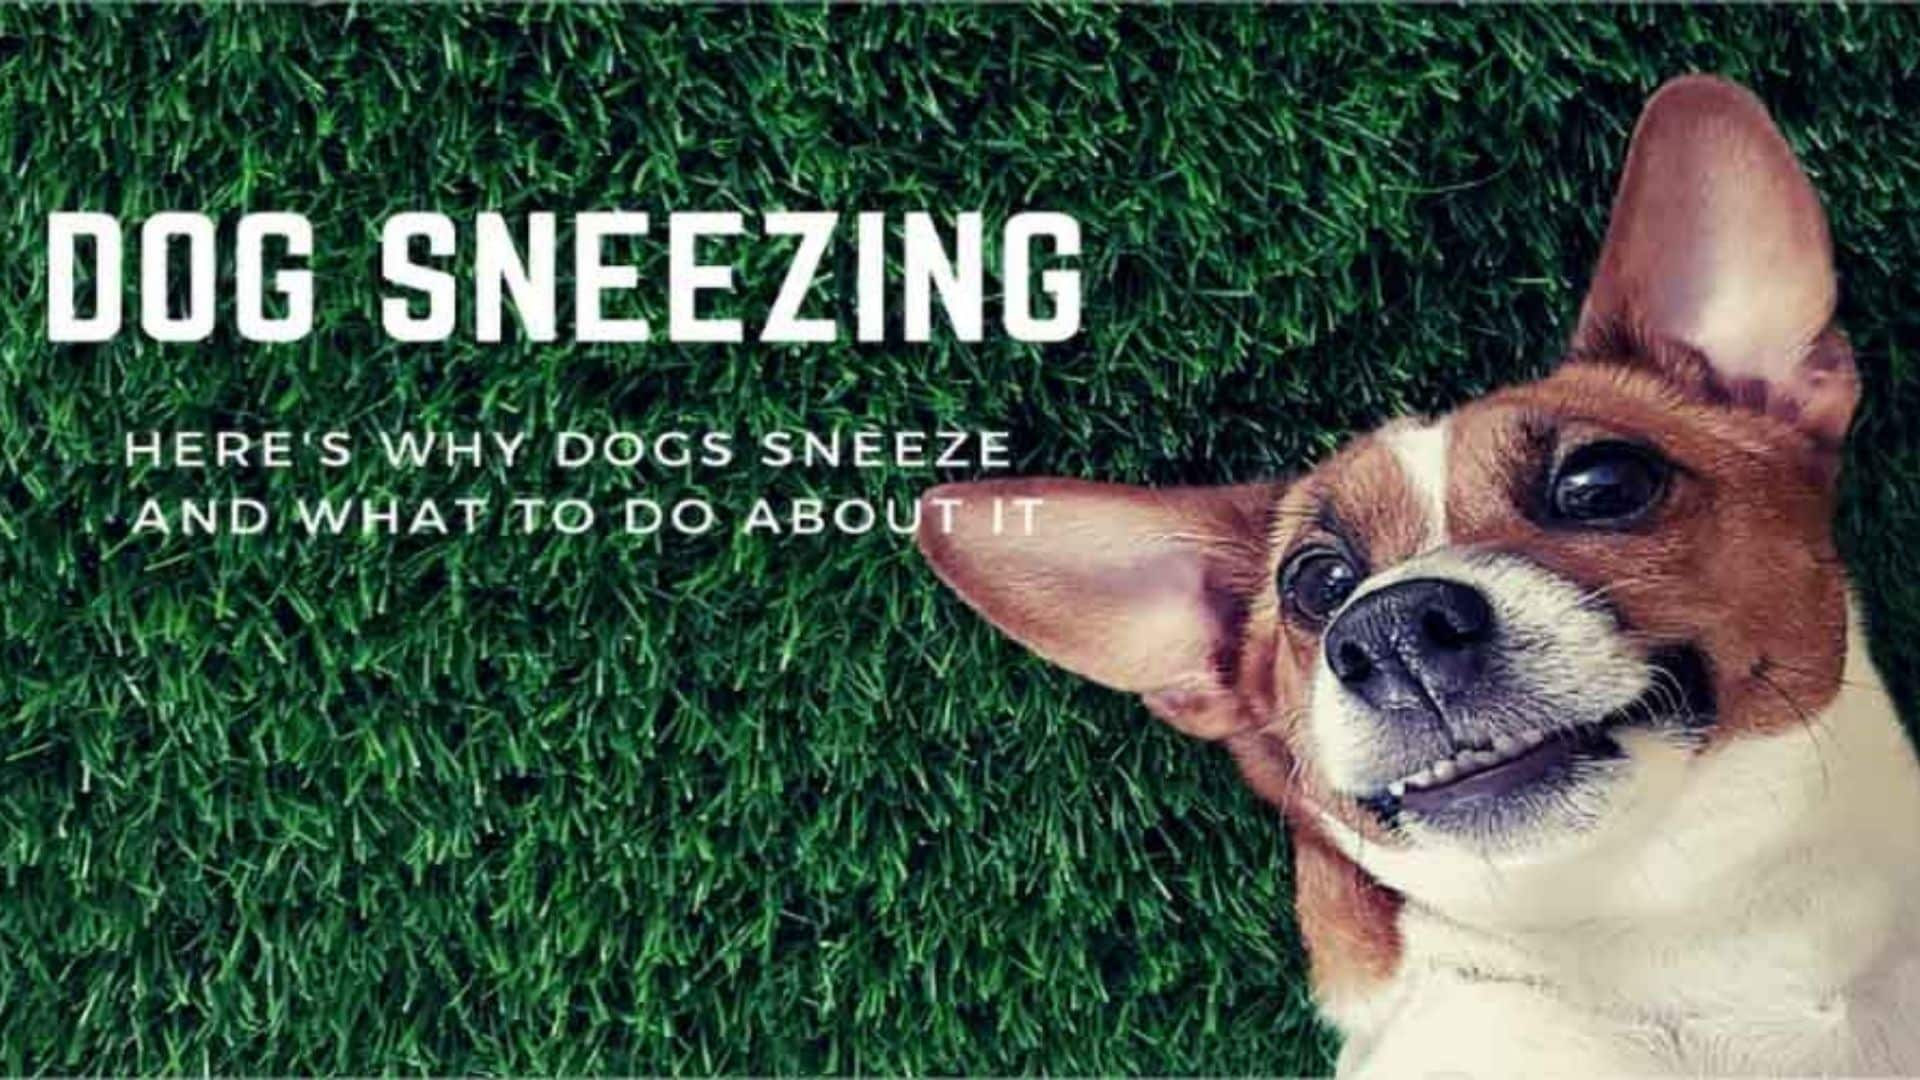 Dog Sneezing? Here’s Why Dogs Sneeze – And What To Do About It